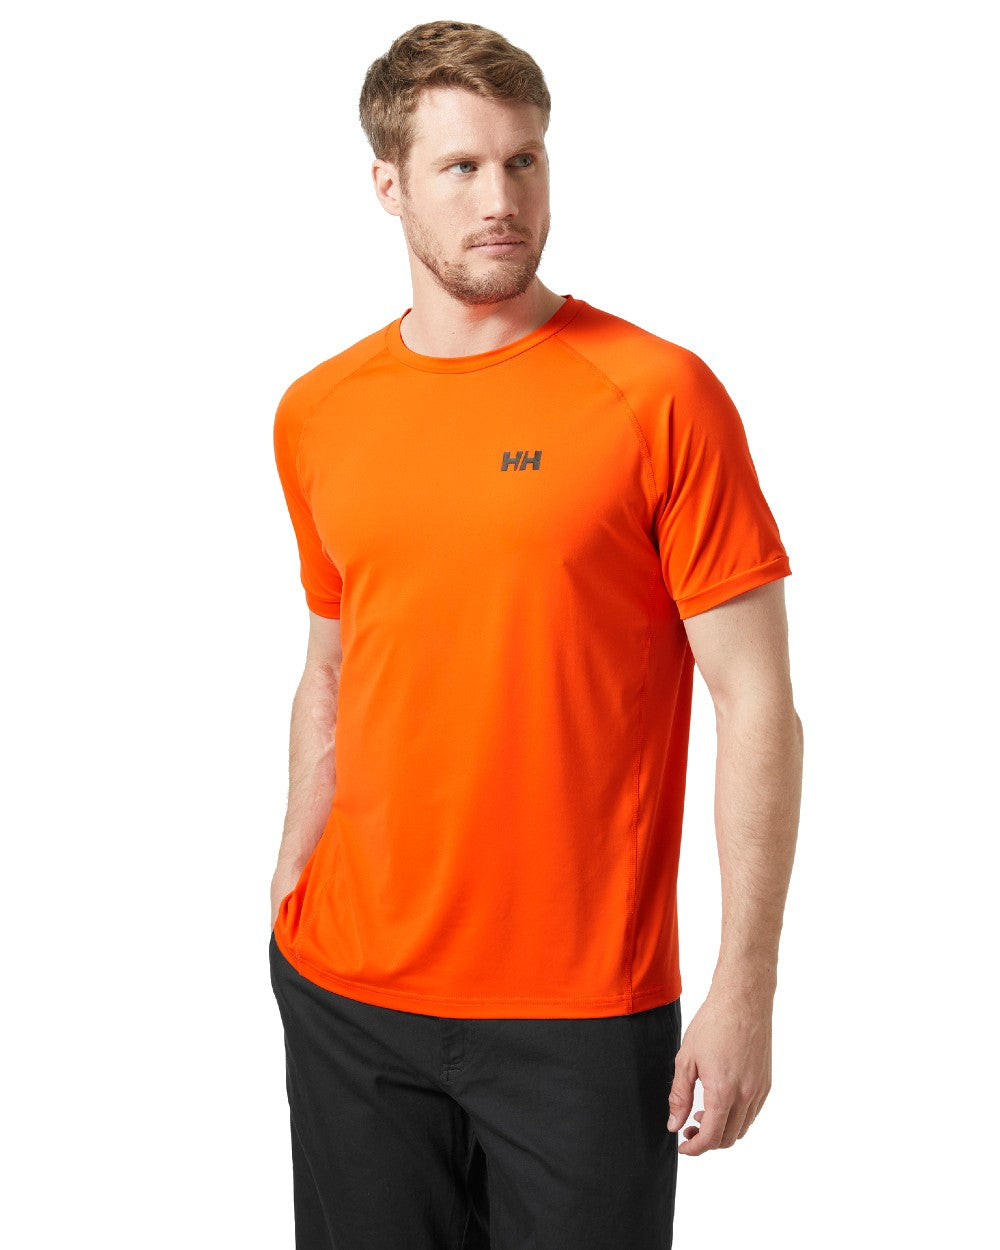 Flame coloured Helly Hansen Mens HP Ocean T-Shirt 2.0 on white background 